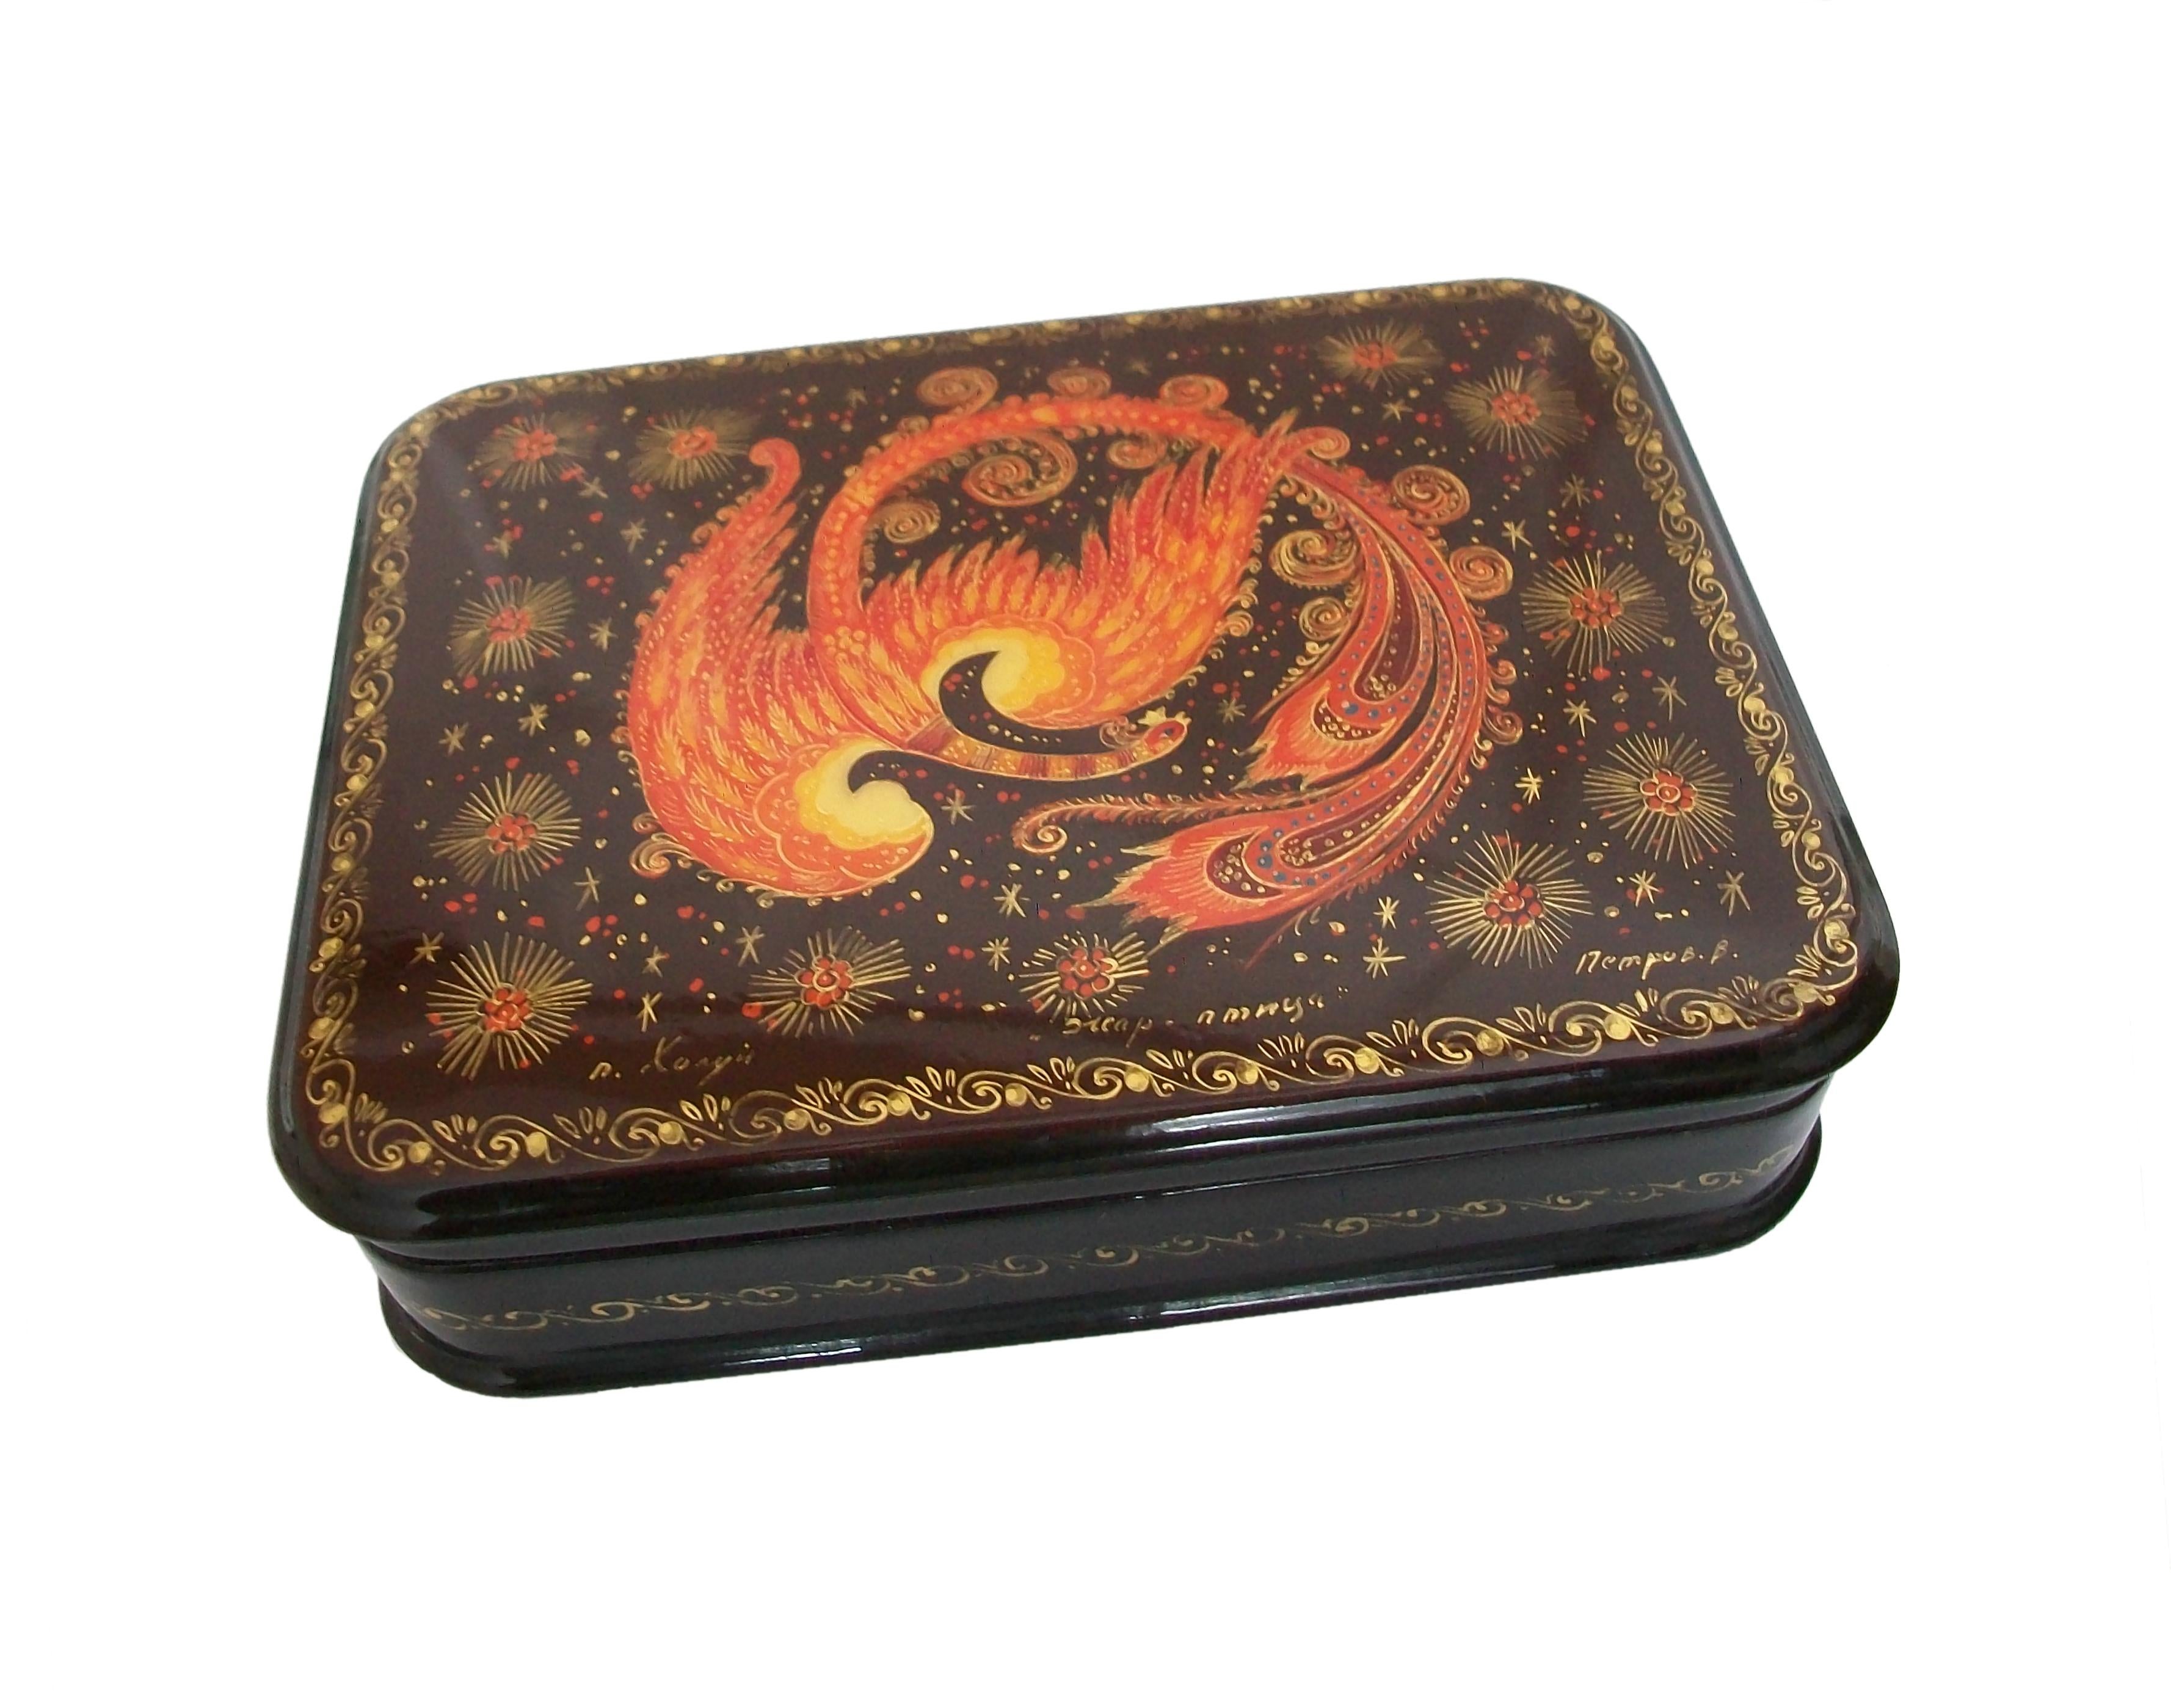 Fedoskino papier-mâché lacquer box - hand painted Phoenix set against a celestial background on brown lacquer with gilt details - black lacquer frame with gilded scrolls - hinged lid - signed - Russia - circa 1980's.

Excellent vintage condition -